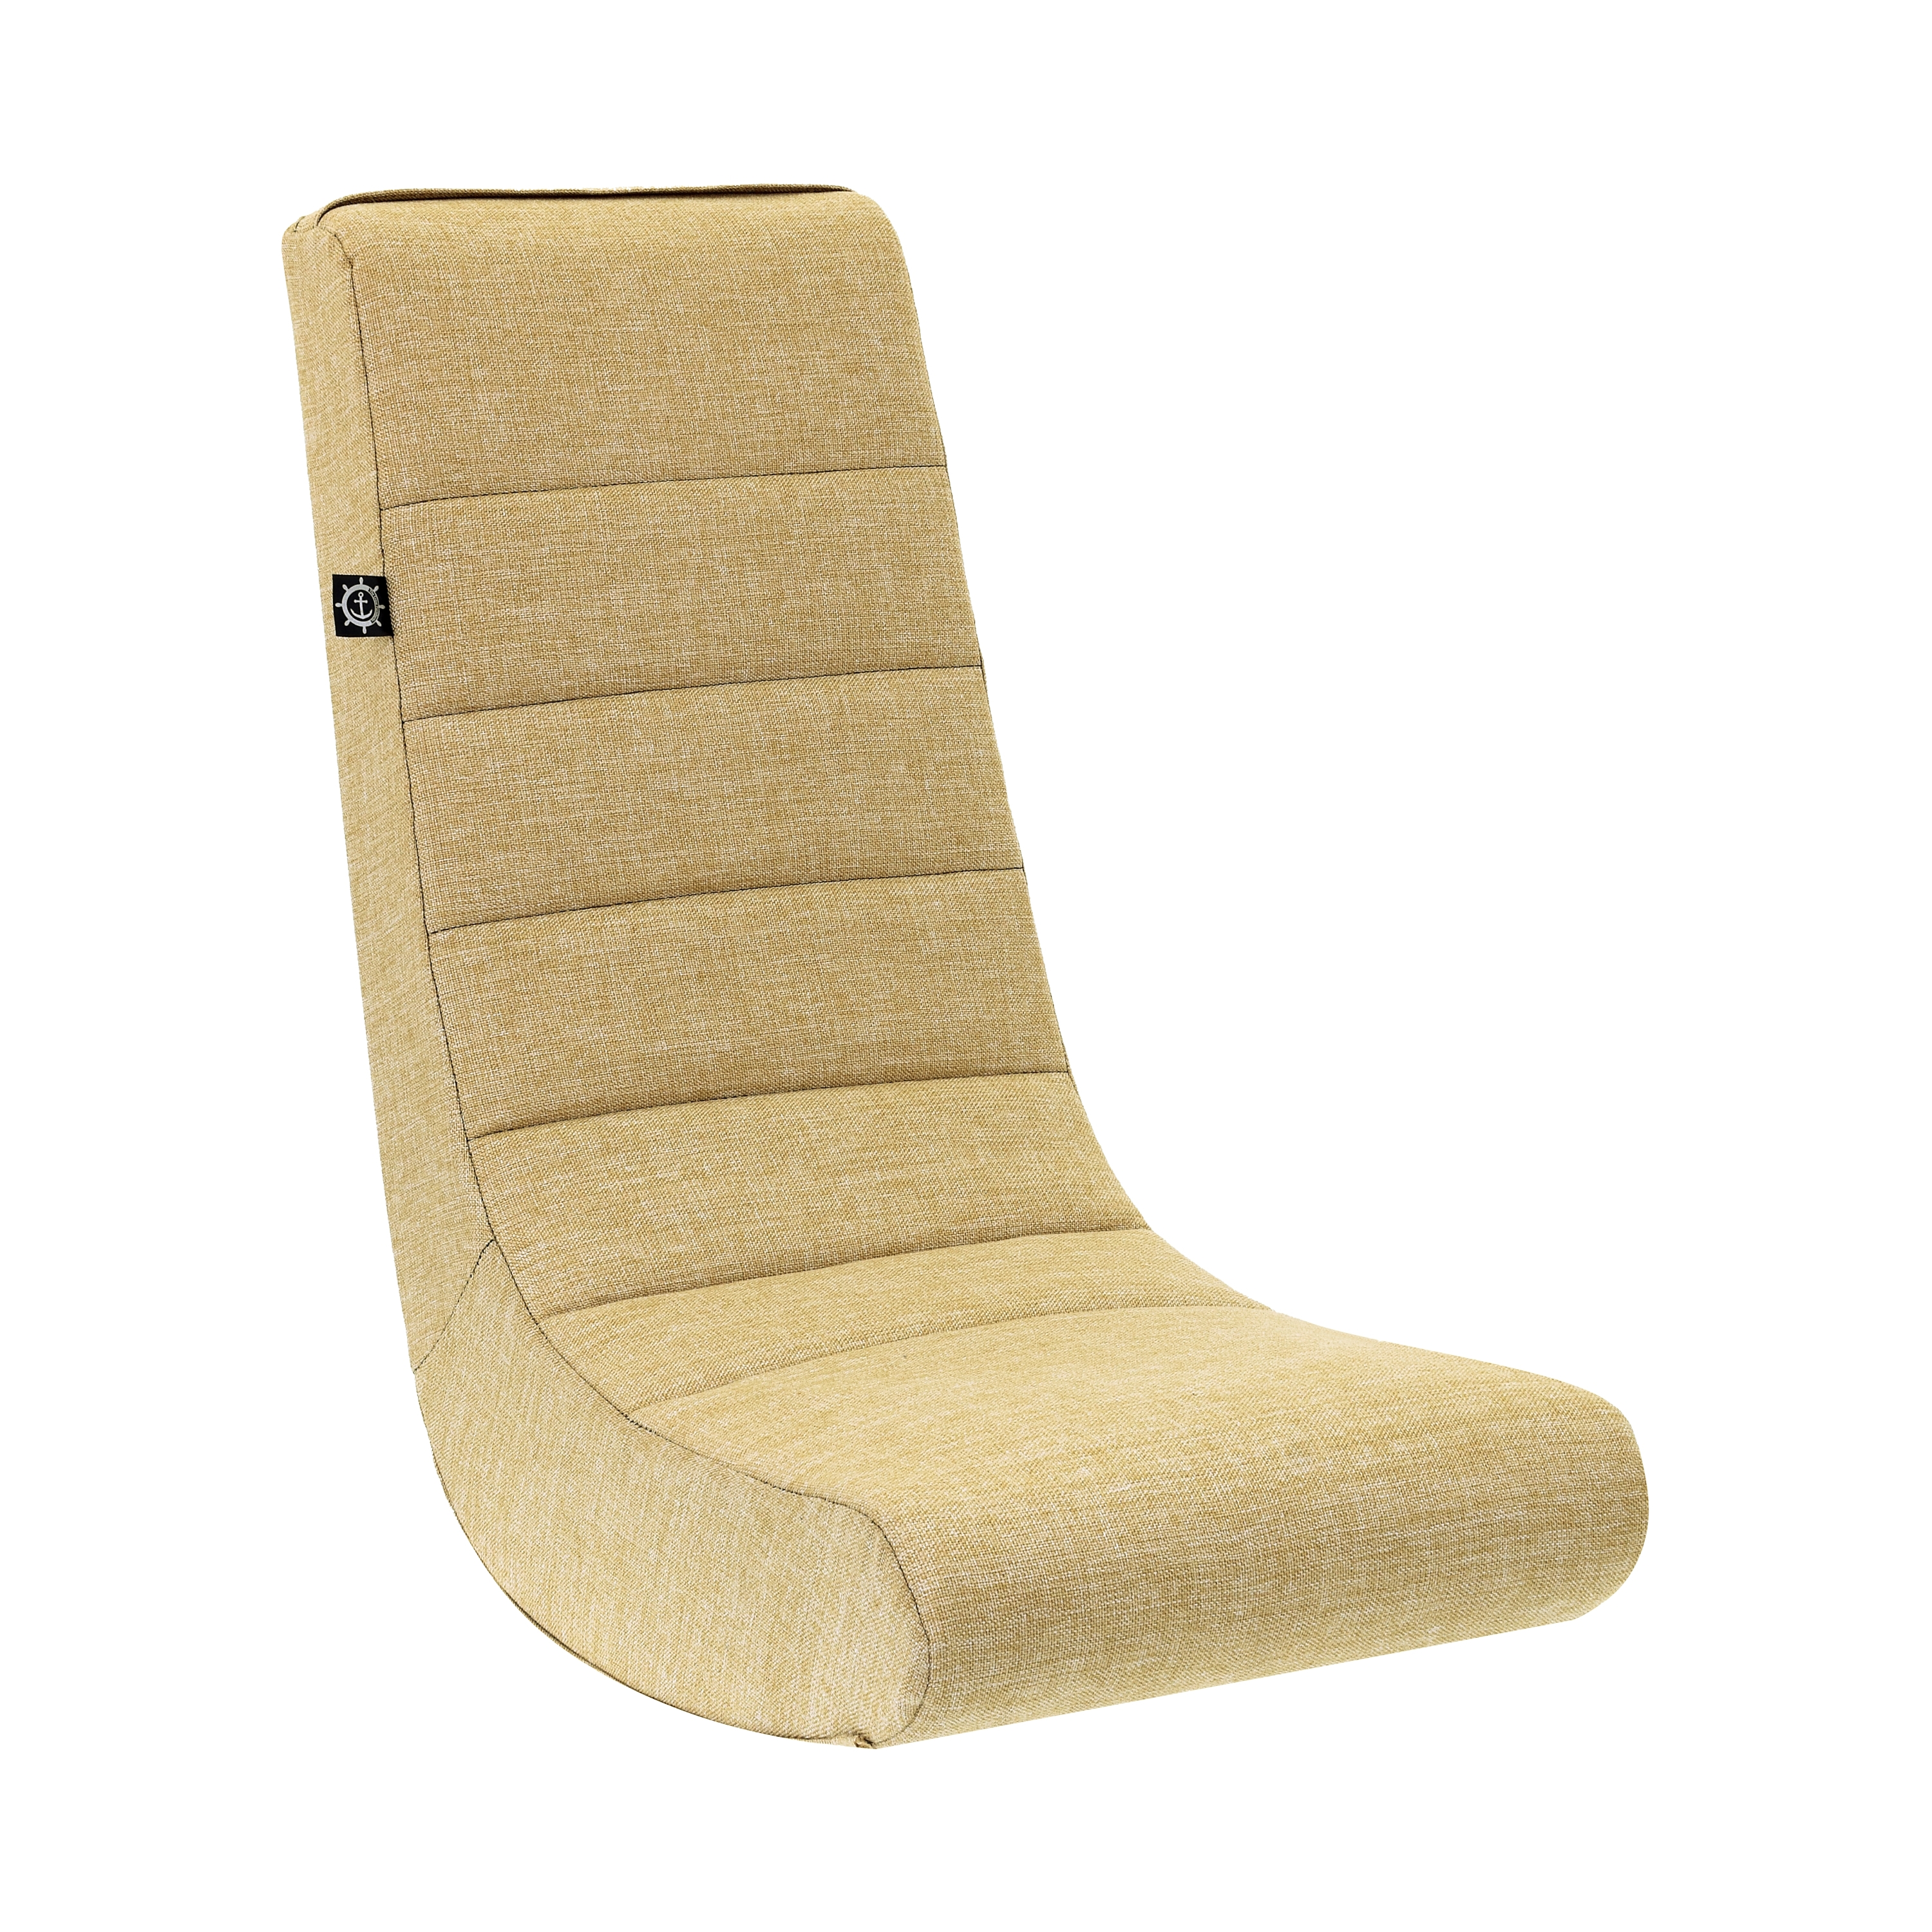 The Crew Furniture Classic Video Rocker Floor Gaming Chair, Kids and Teens, Polyester Linen, Camel - image 1 of 9